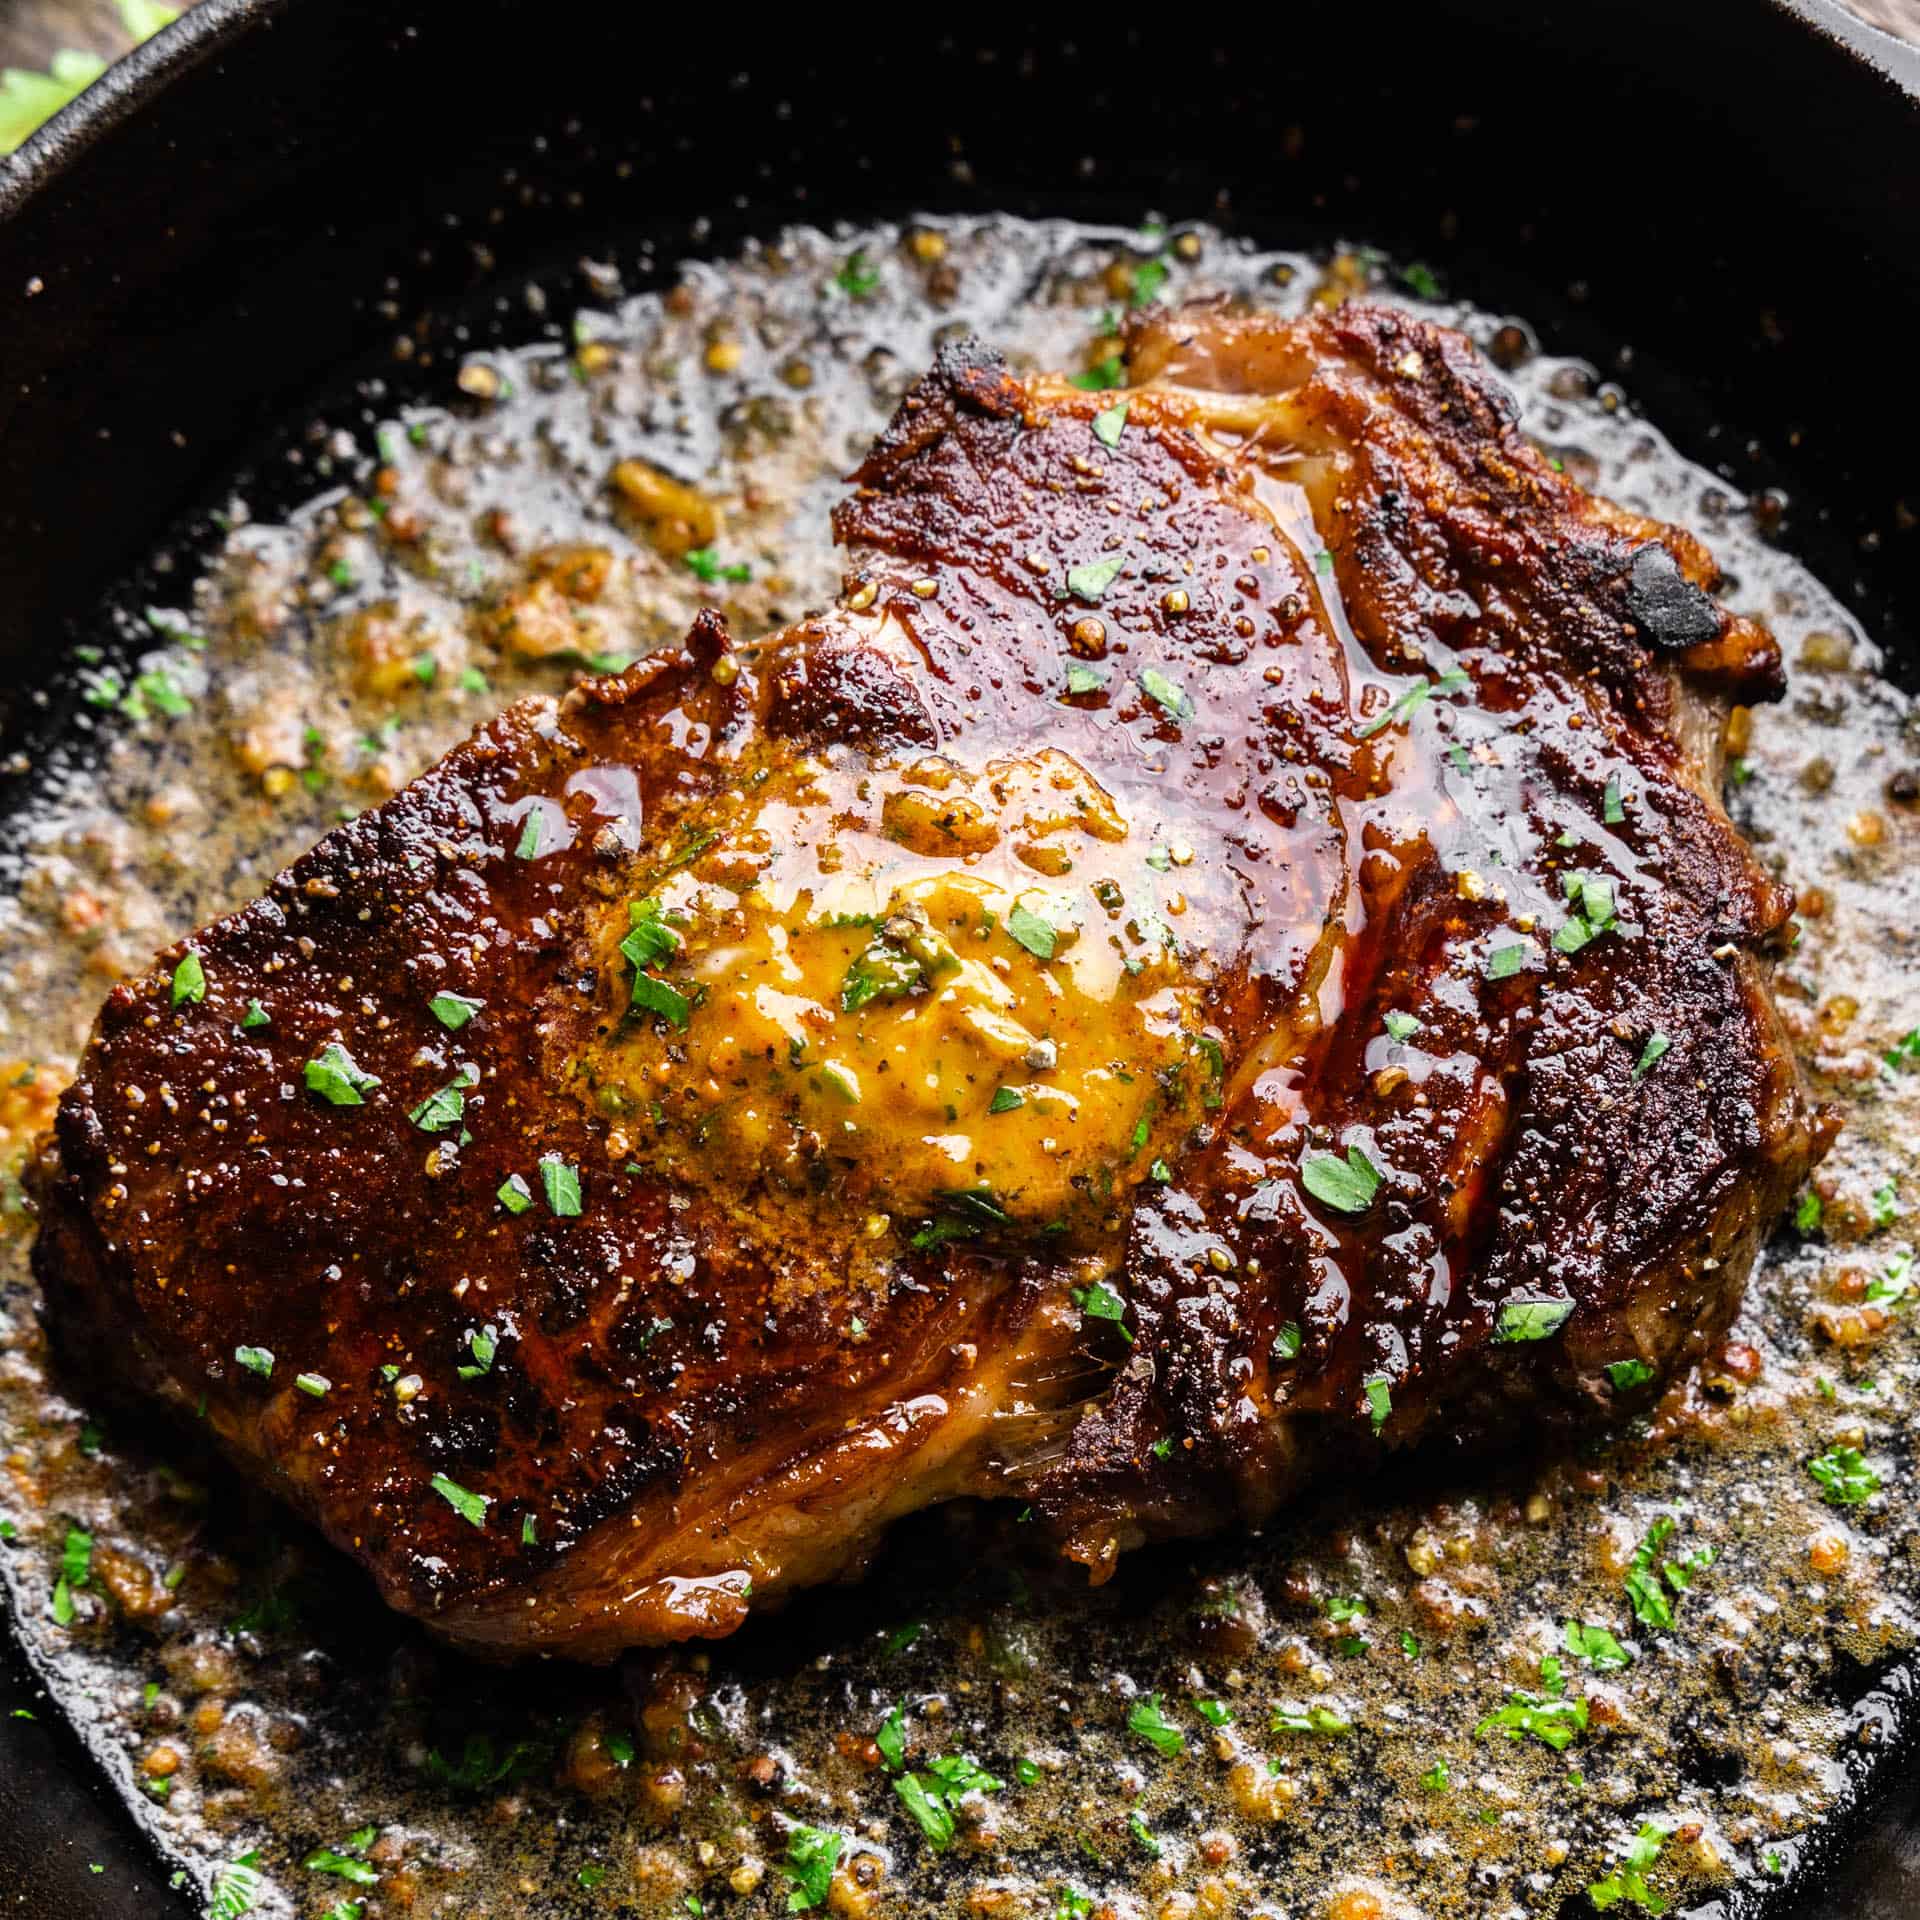 An overhead view of a ribeye steak in a skillet topped with resting butter.